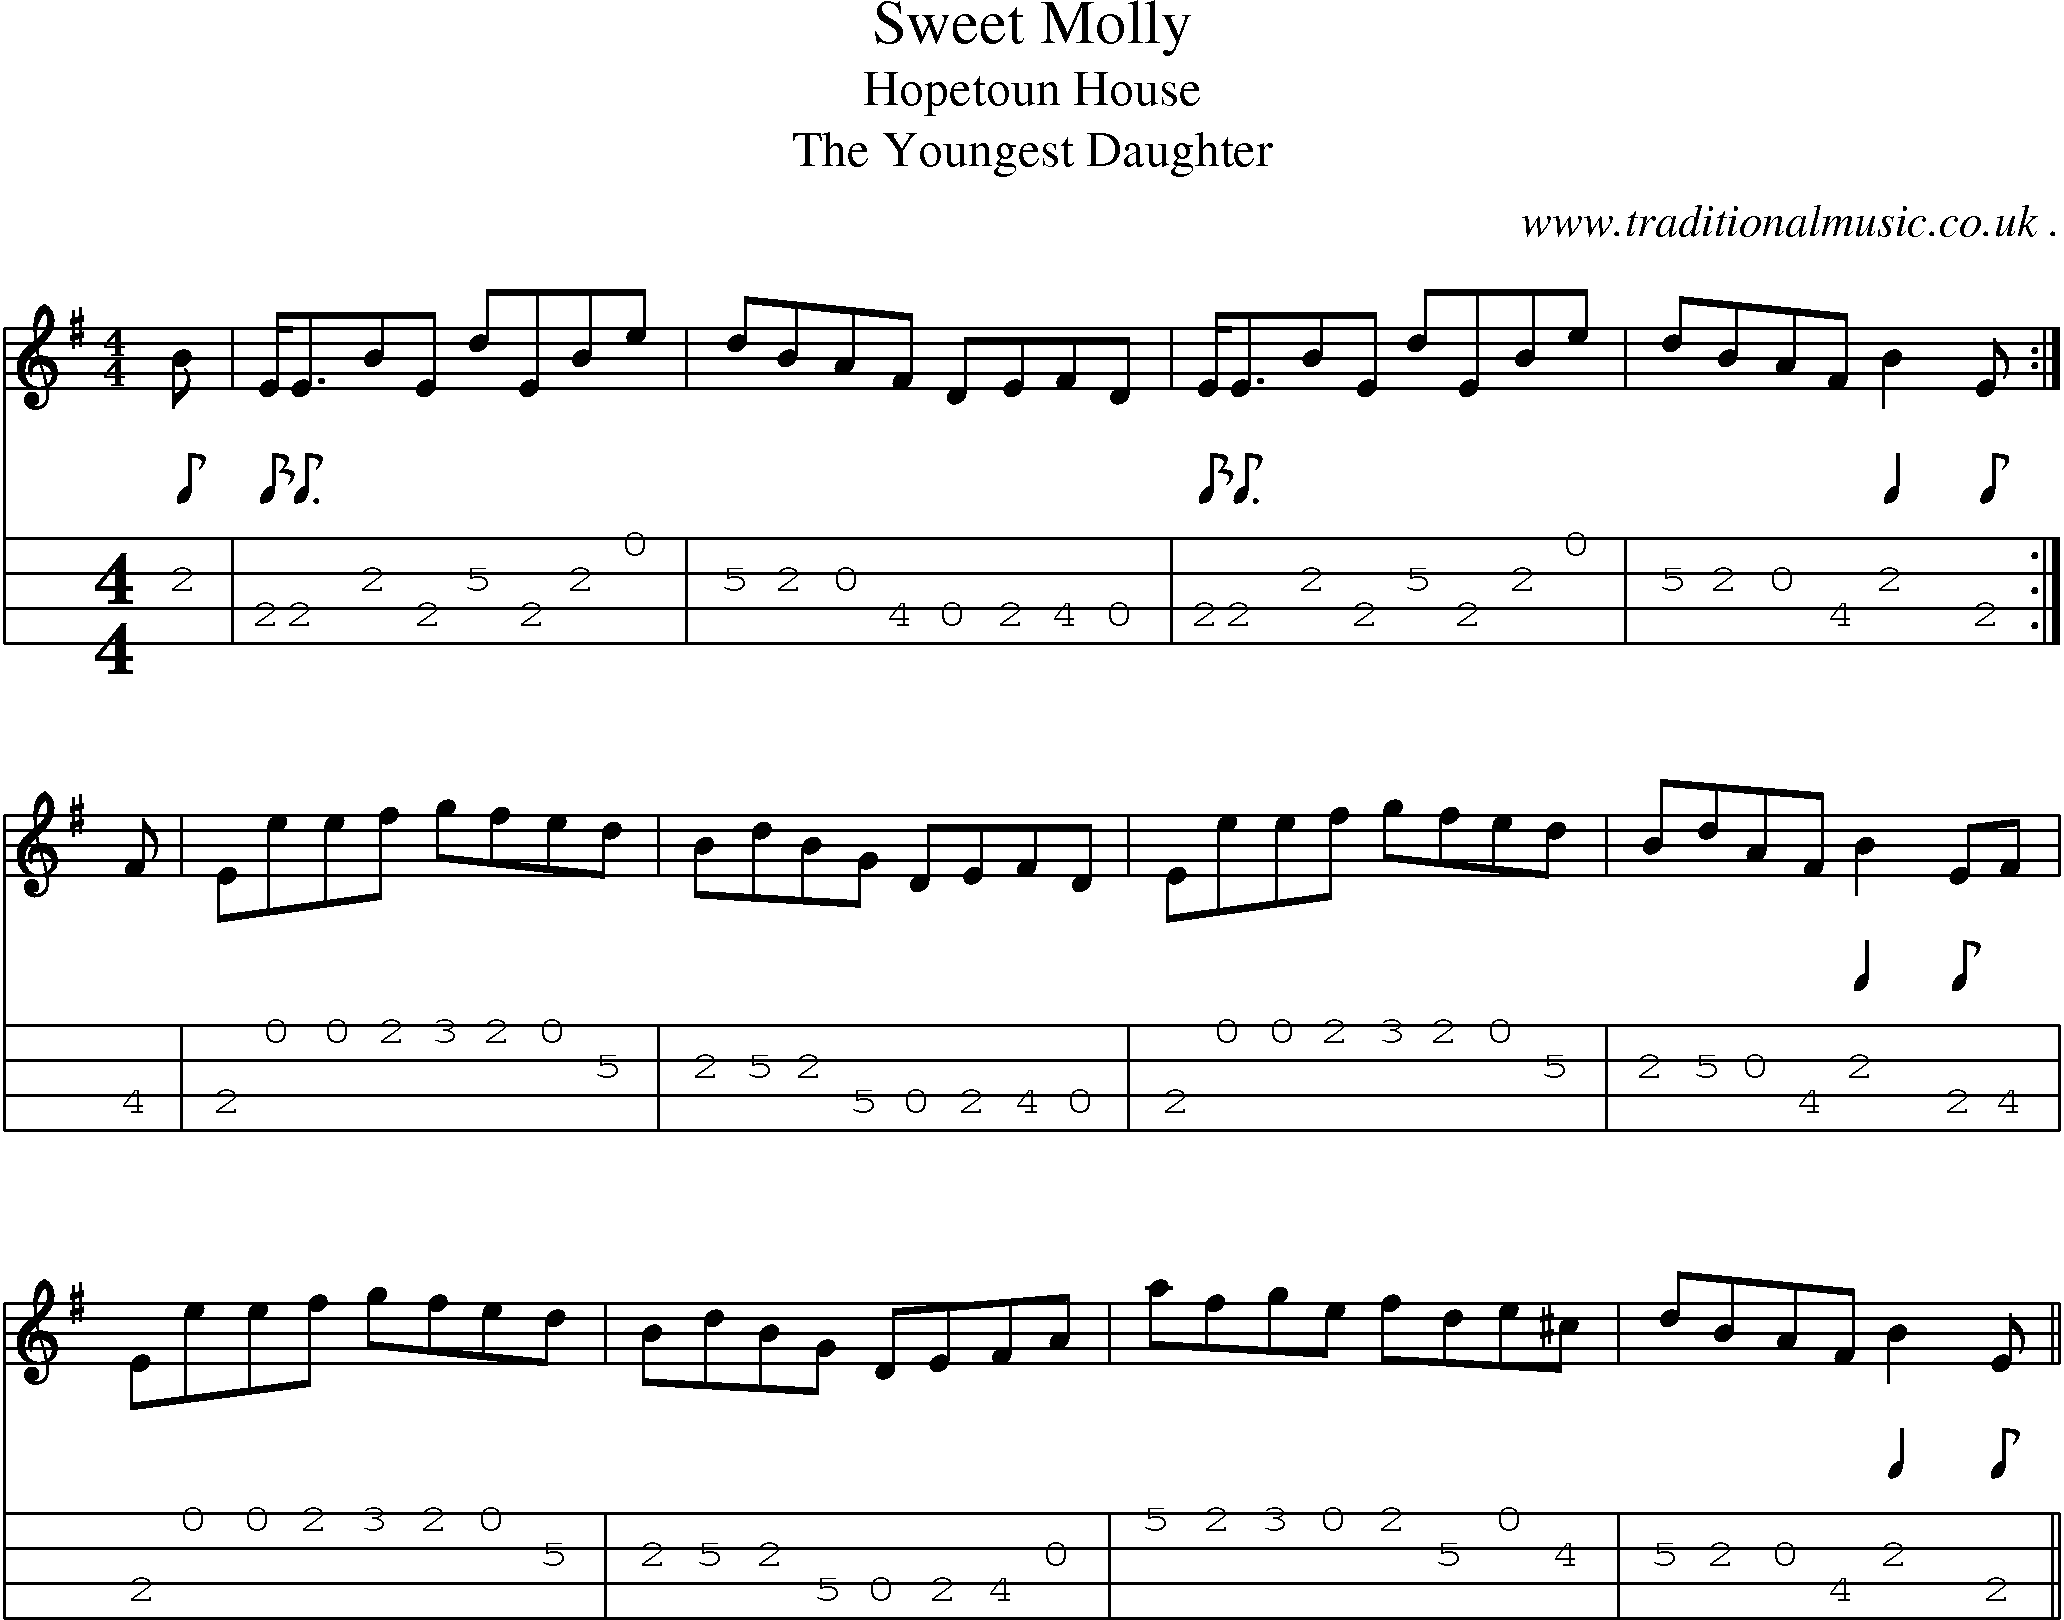 Sheet-music  score, Chords and Mandolin Tabs for Sweet Molly